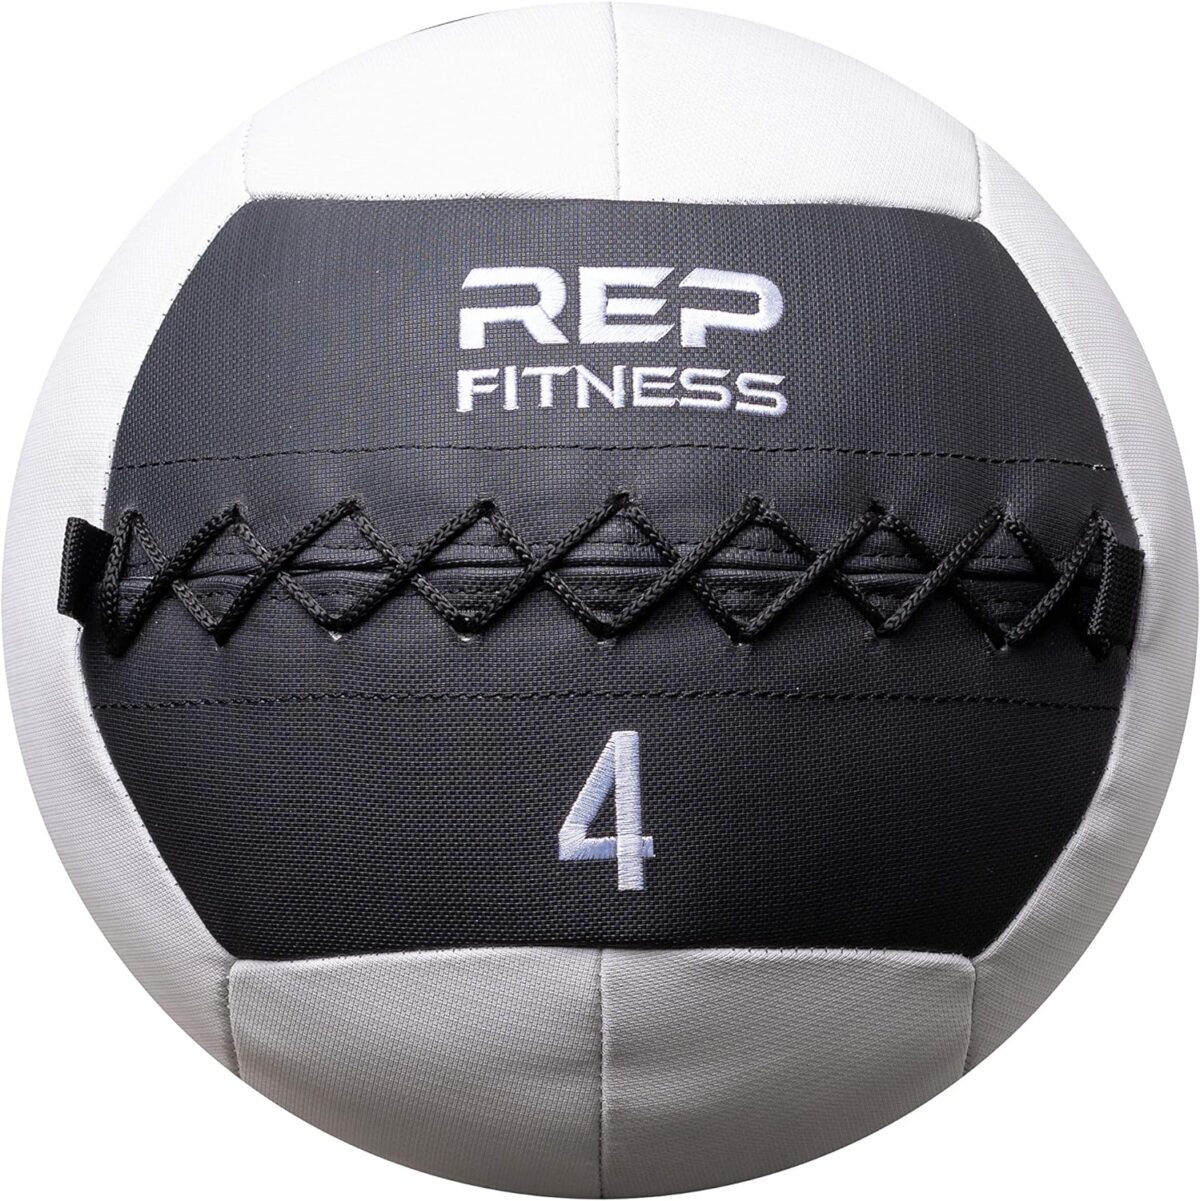 Featured Image for REP FITNESS Soft Medicine Ball/Wall Ball for Strength and Conditioning Workouts, Core Exercises, Cross Training